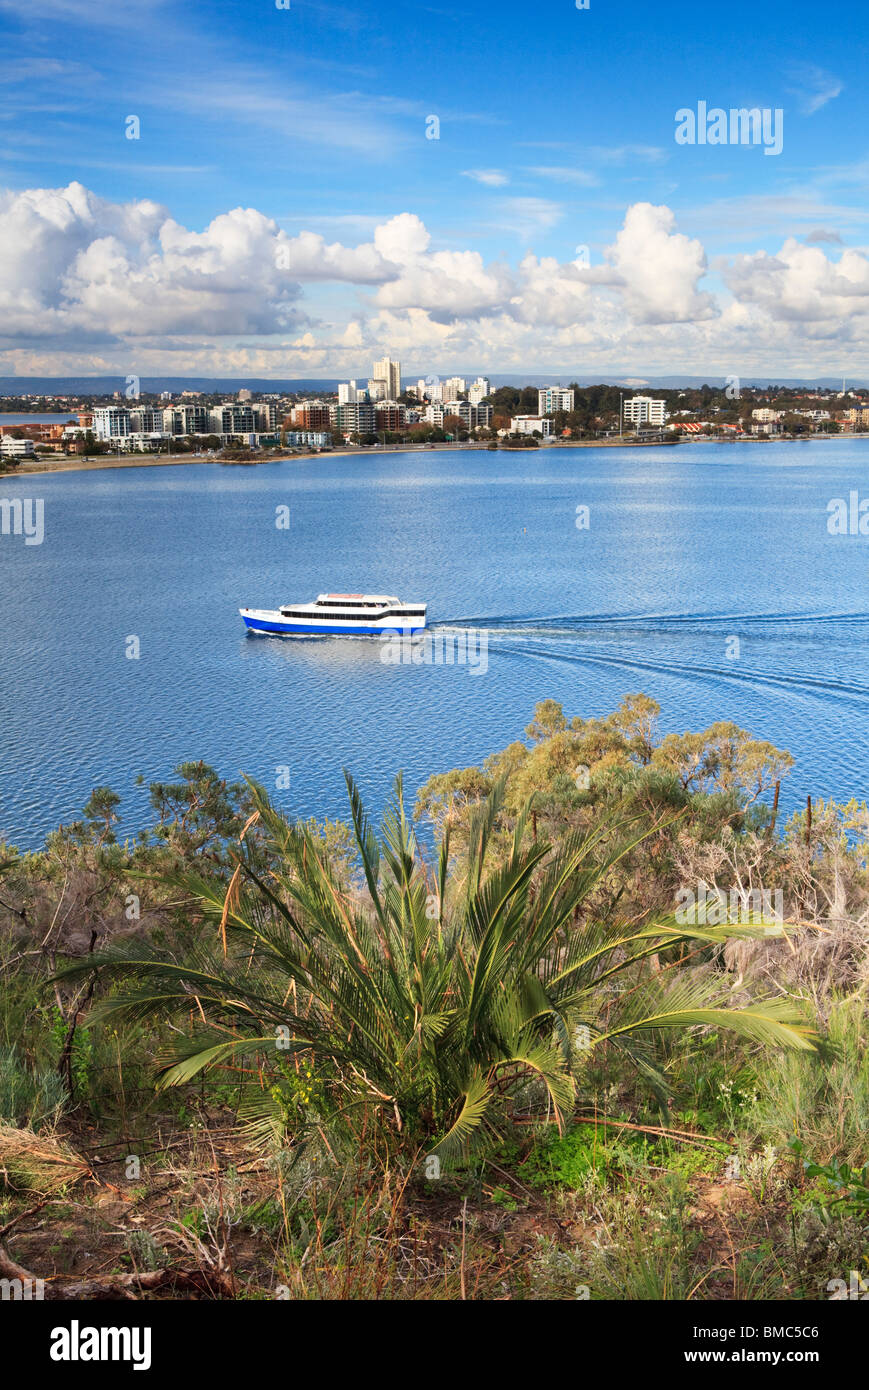 Ferry on the Swan River, with a Macrozamia fraseri plant in King's Park in the foreground. South Perth is in the distance. Stock Photo